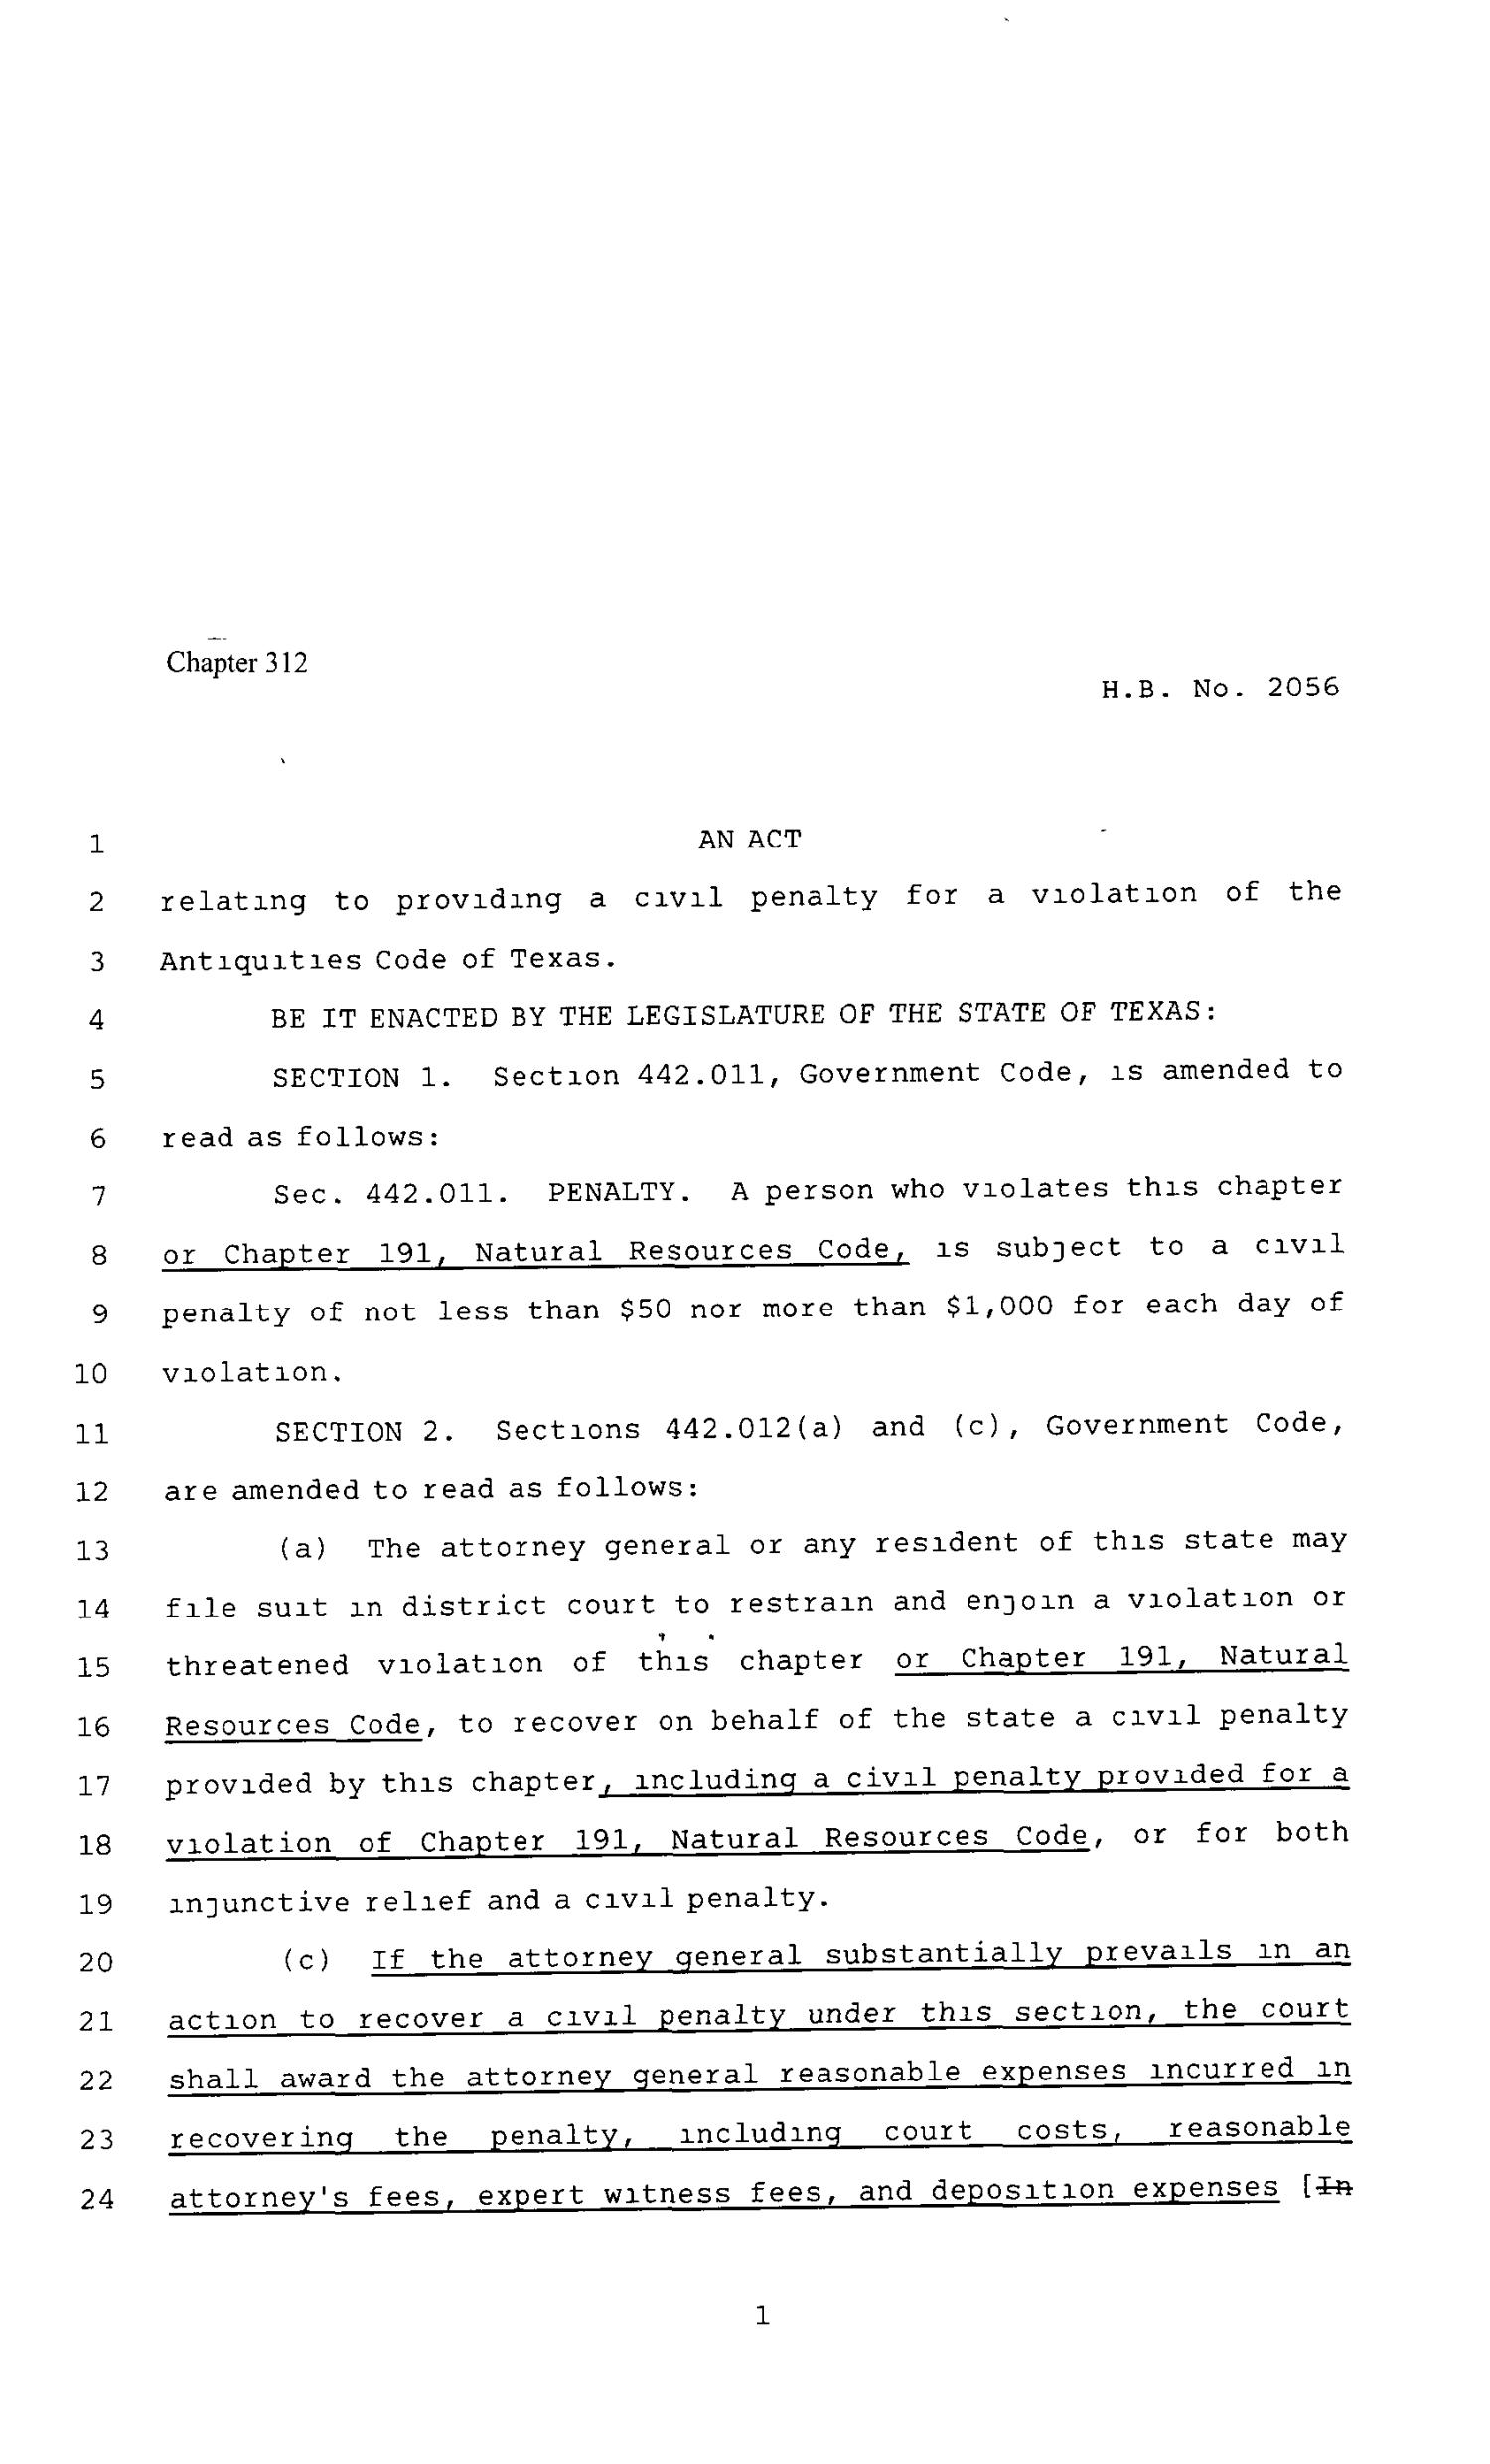 80th Texas Legislature, Regular Session, House Bill 2056, Chapter 312
                                                
                                                    [Sequence #]: 1 of 3
                                                